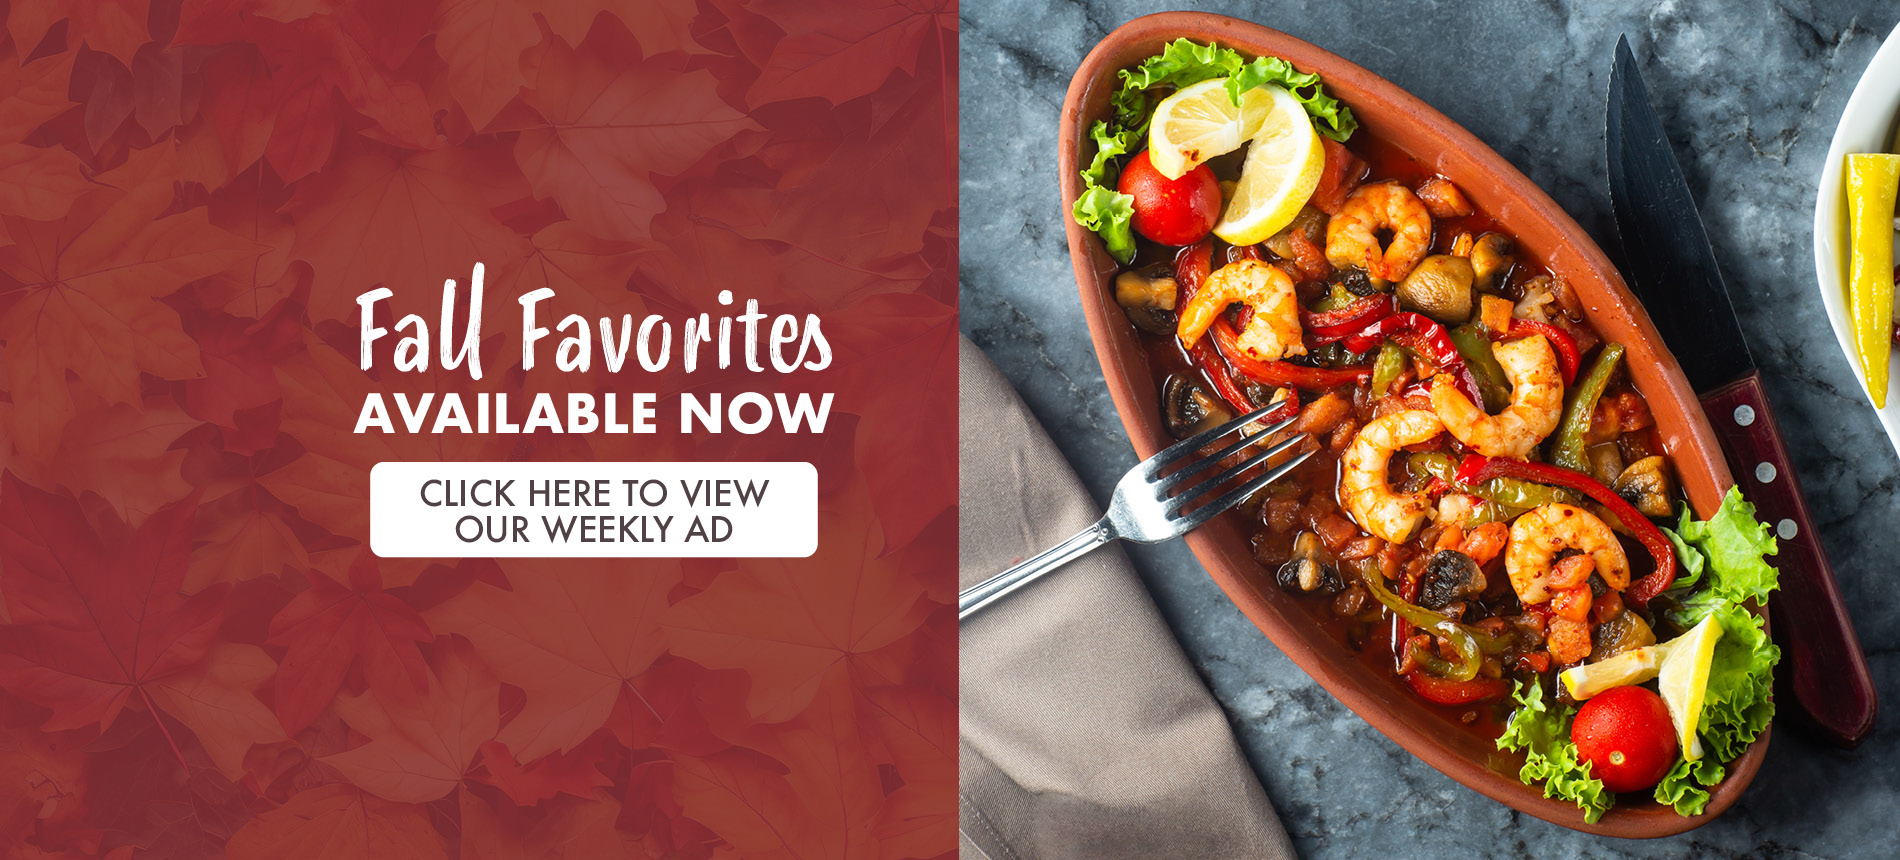 Fall Favorites - Weekly Ad